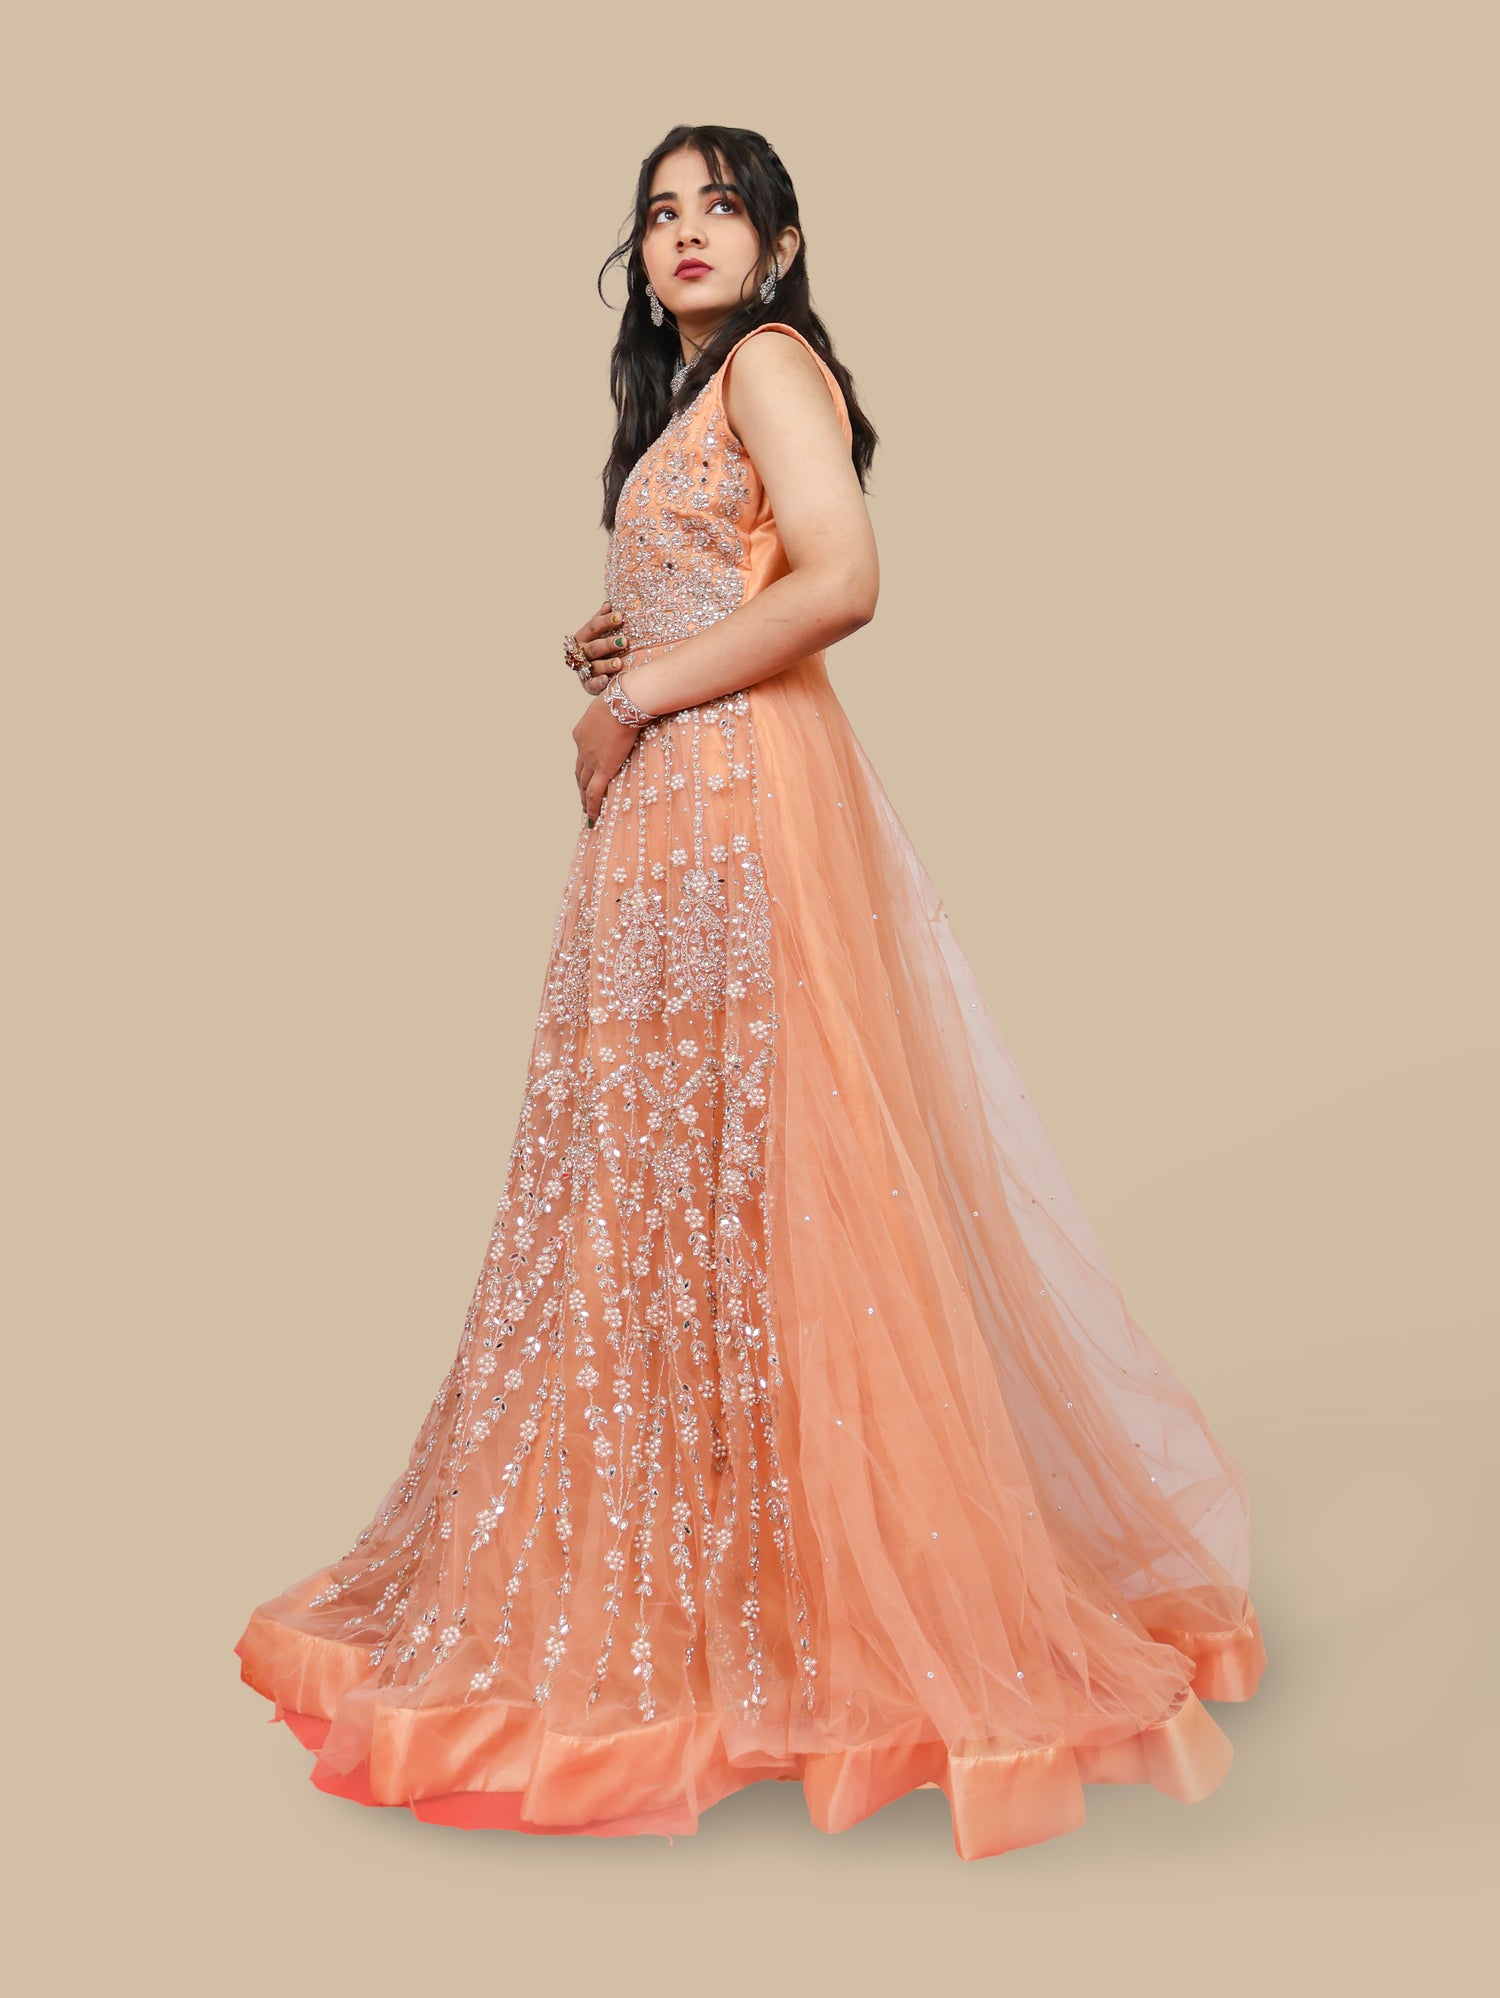 Net Fabric Gown with Pearl &amp; Embroidery by Shreekama Peach Designer Gowns for Party Festival Wedding Occasion in Noida